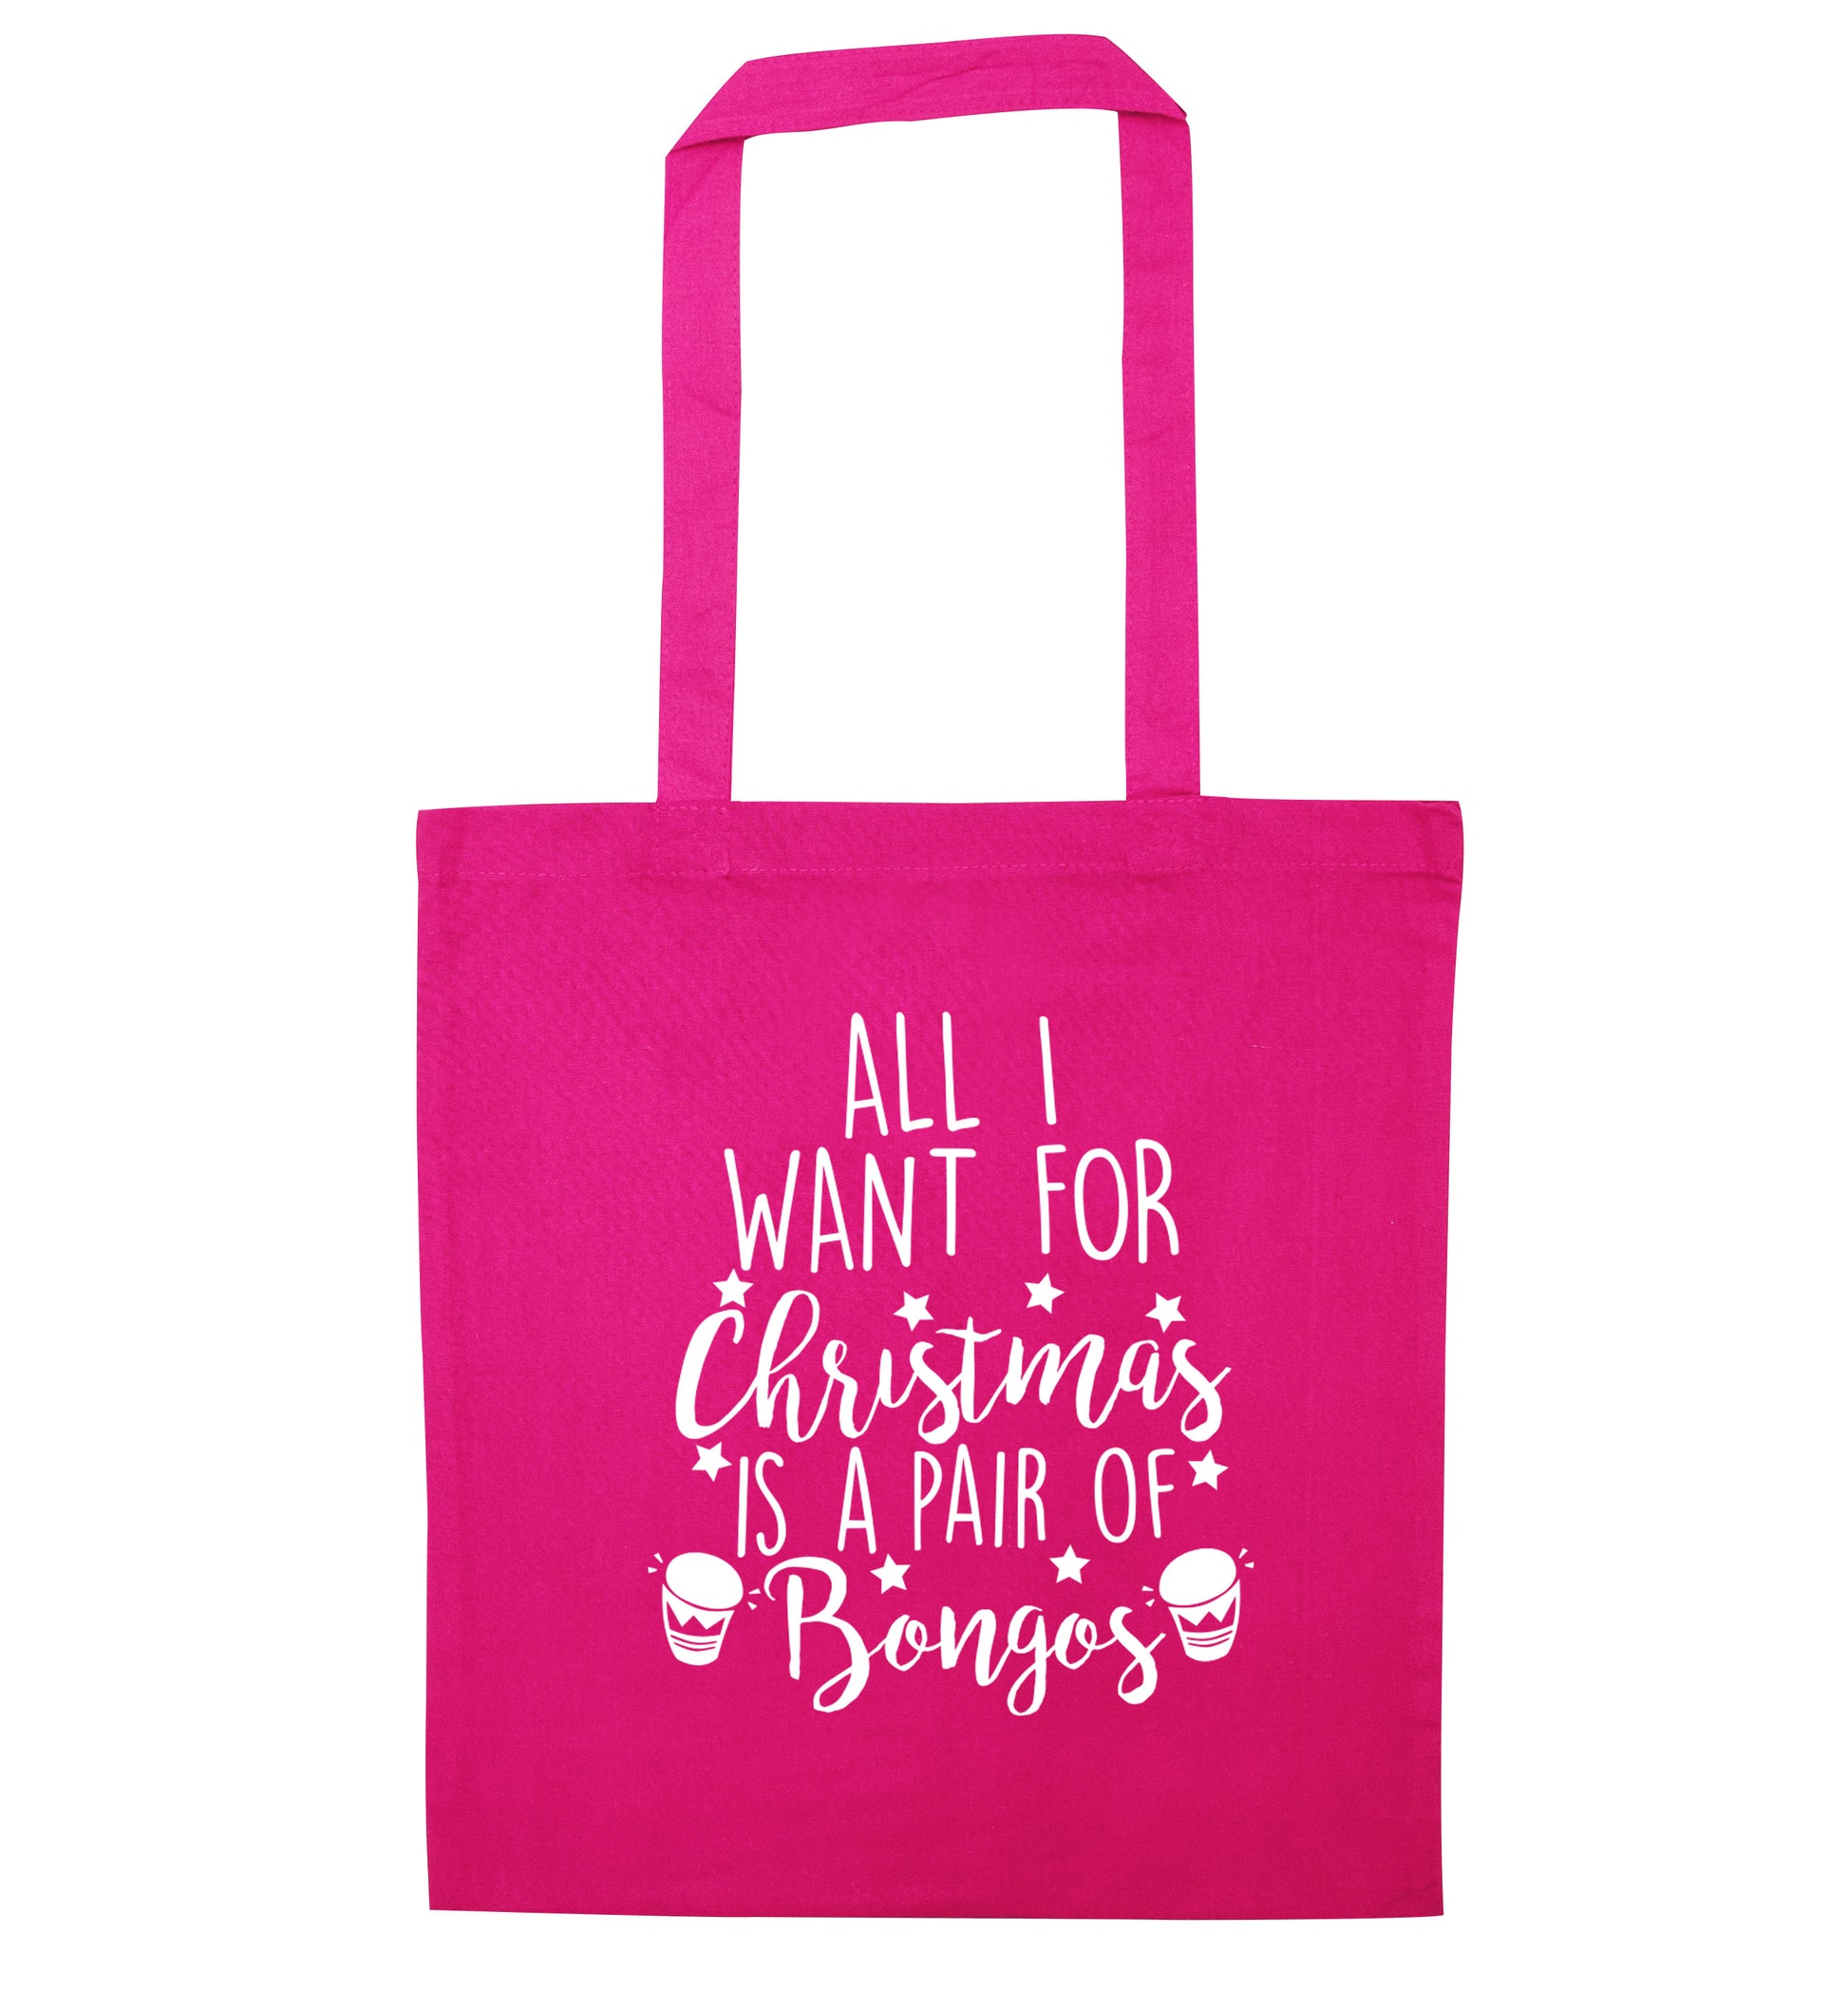 All I want for Christmas is a pair of bongos! pink tote bag